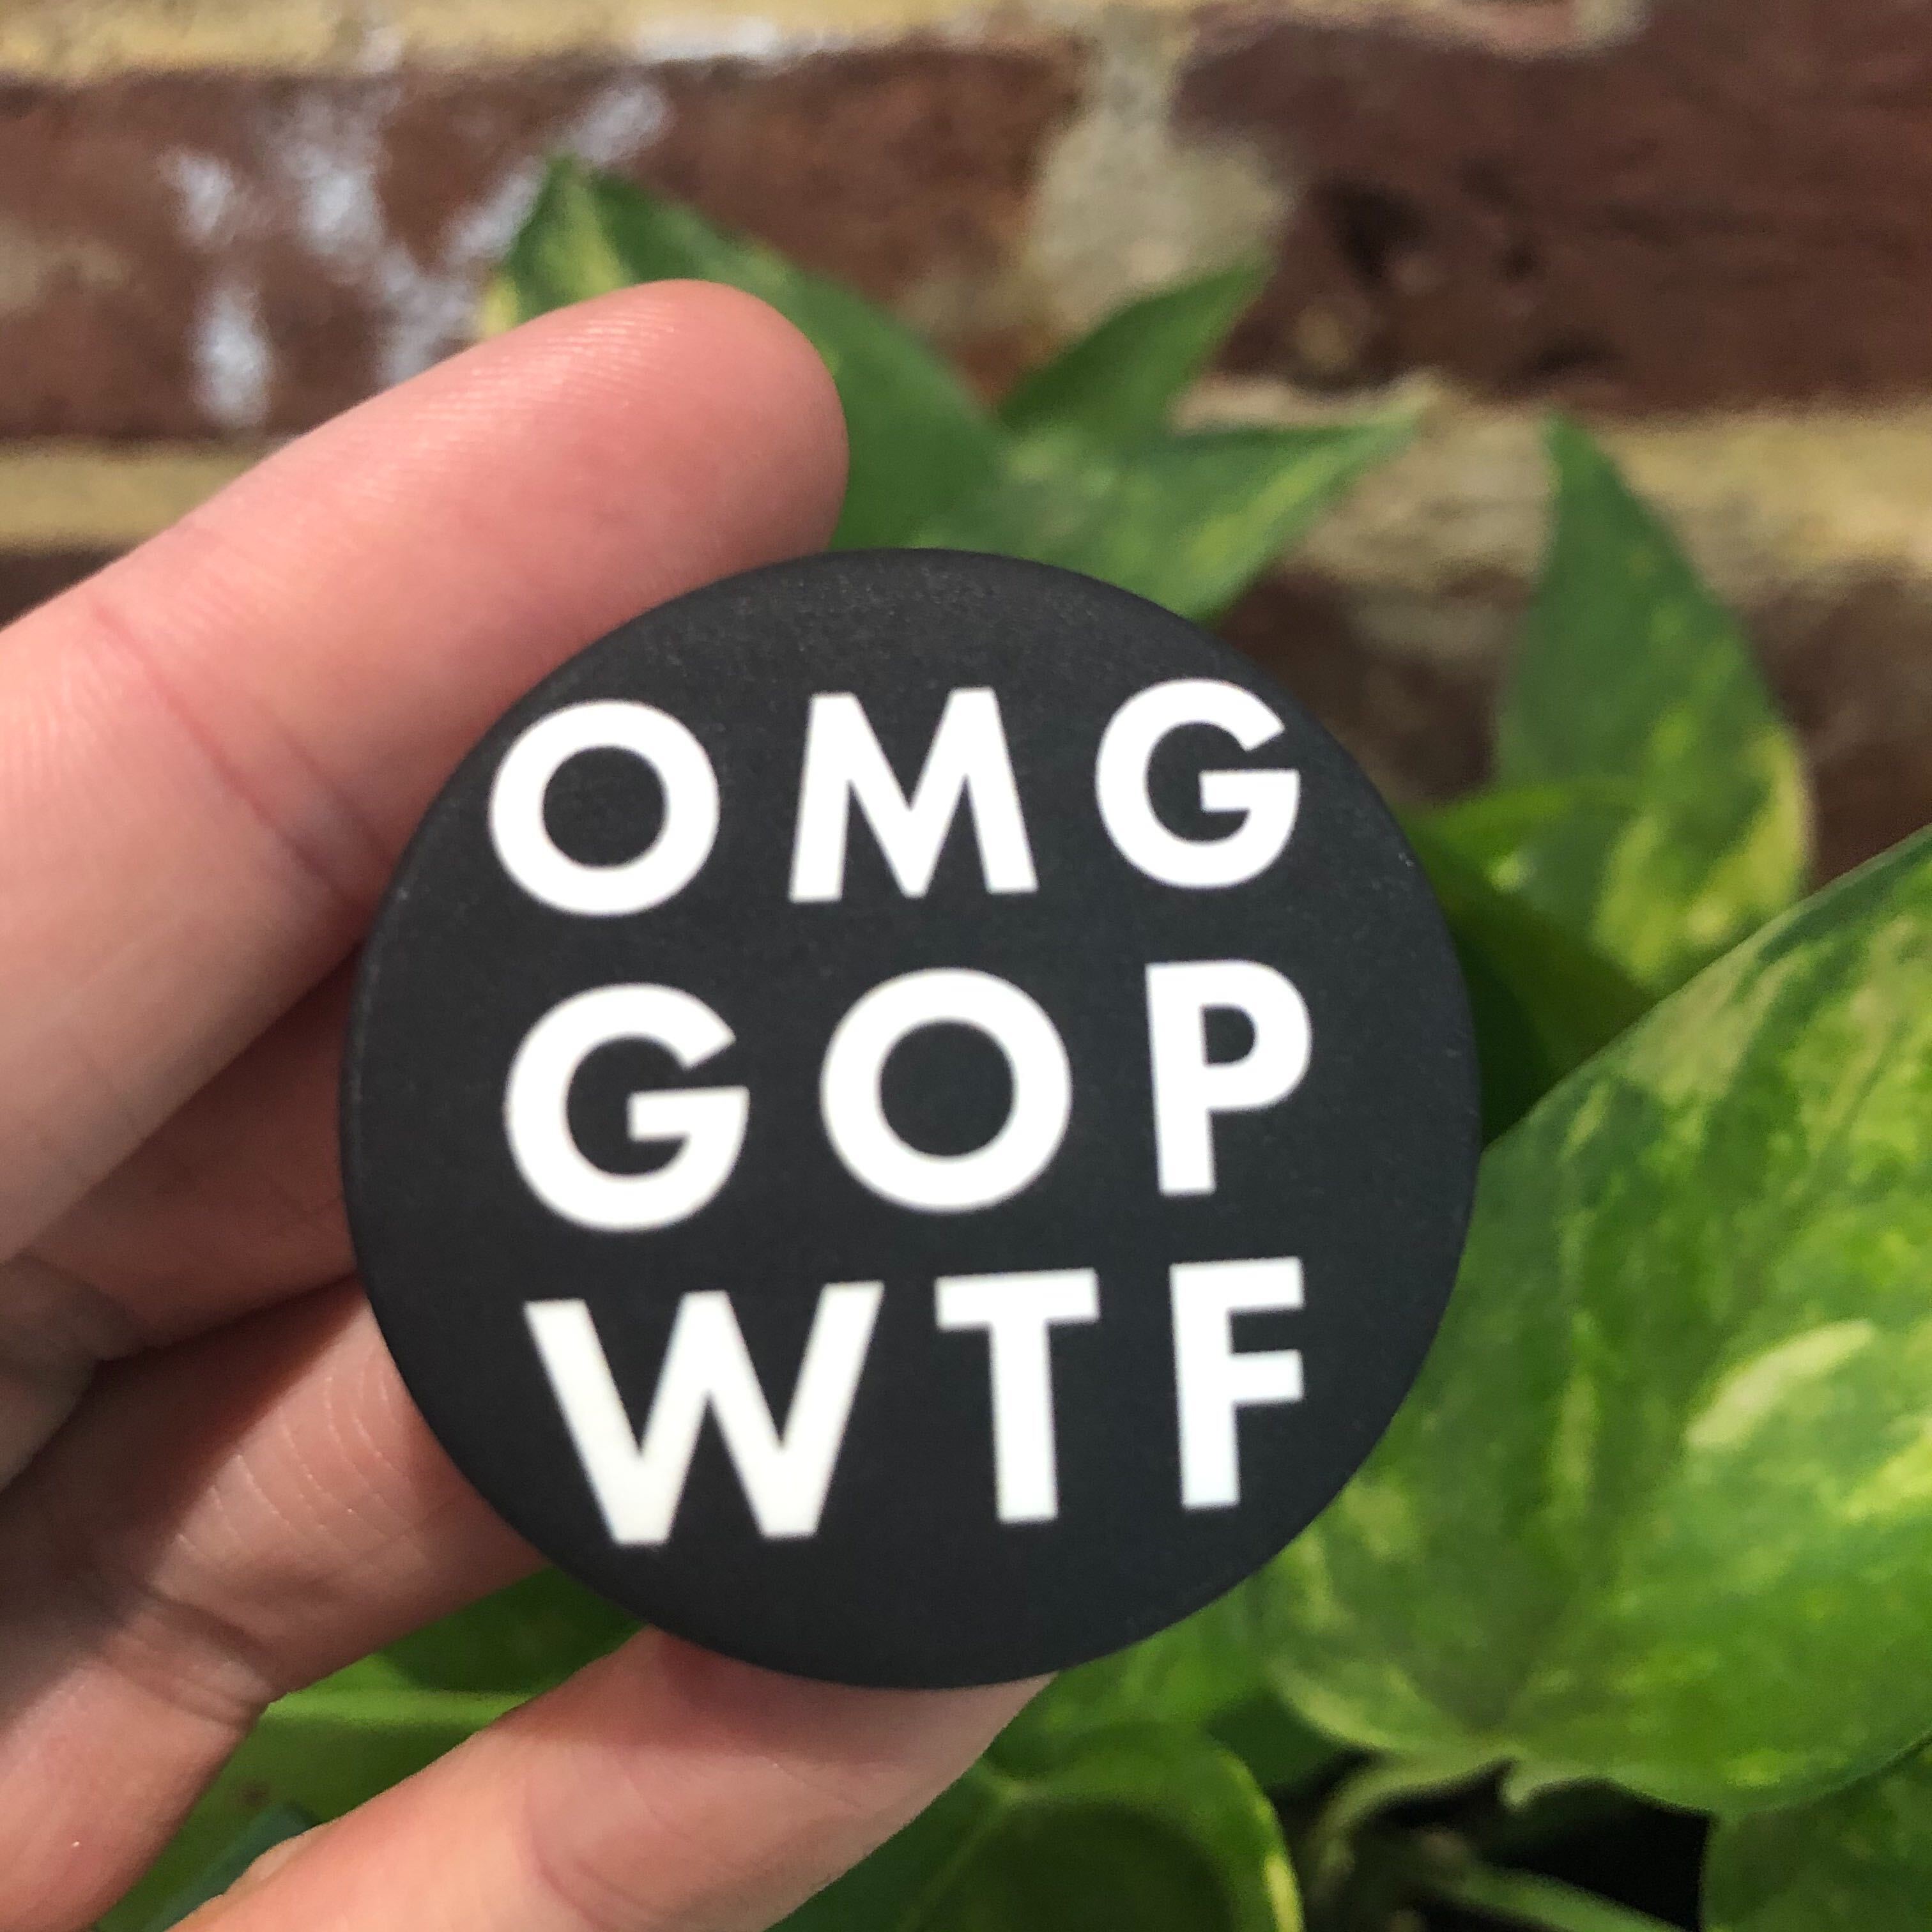 OMG GOP WTF Button - The Outrage